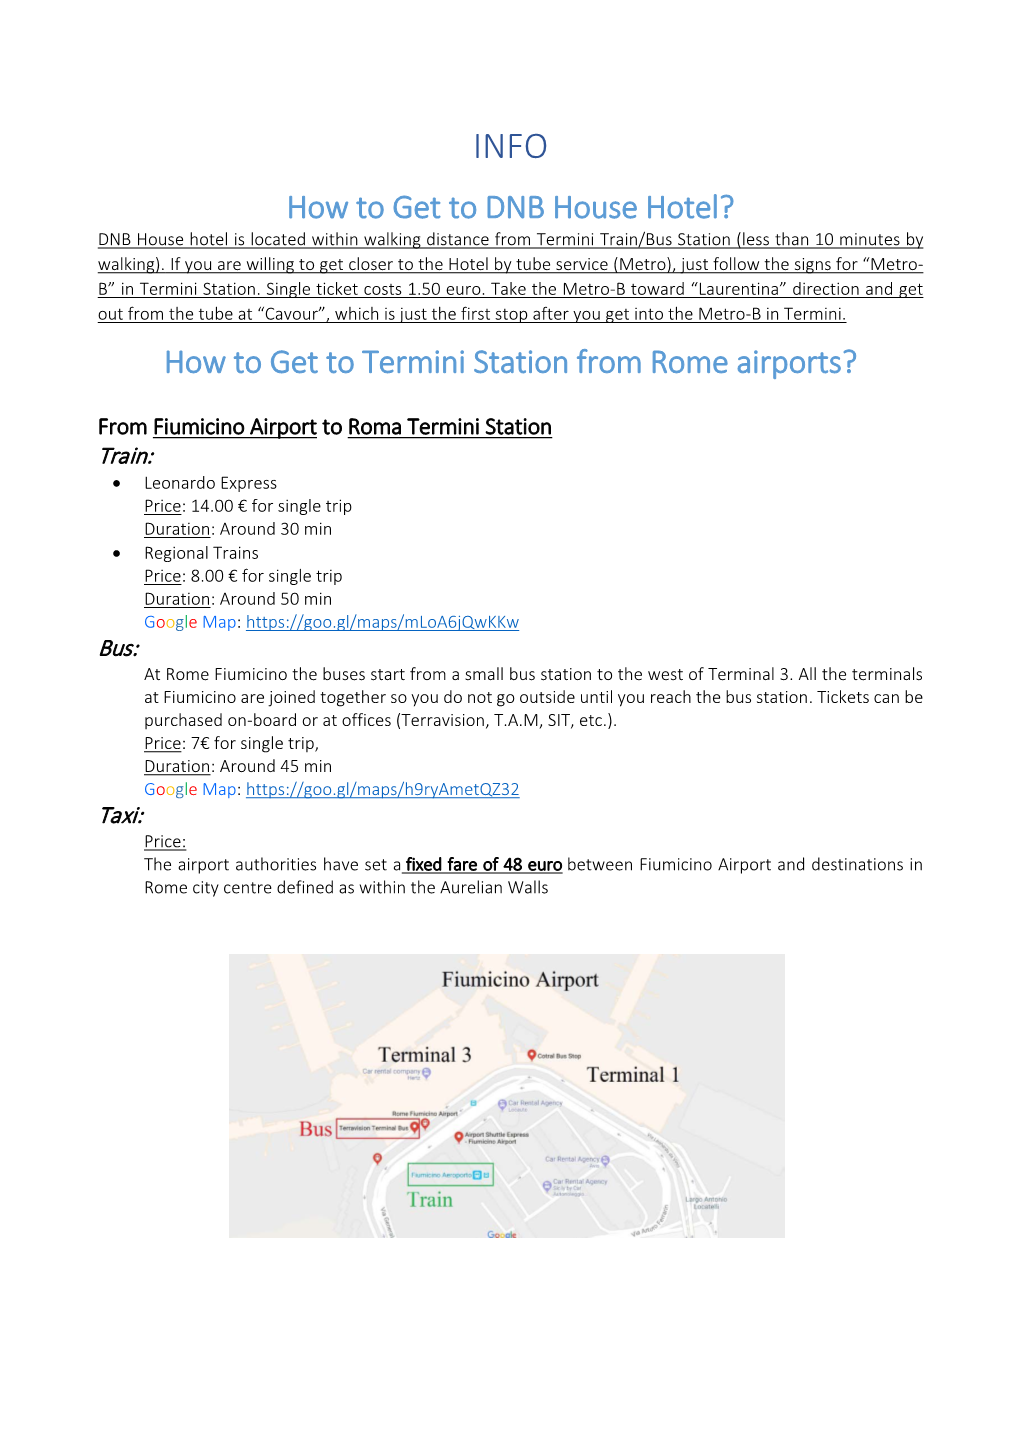 How to Get to Termini Station from Rome Airports?